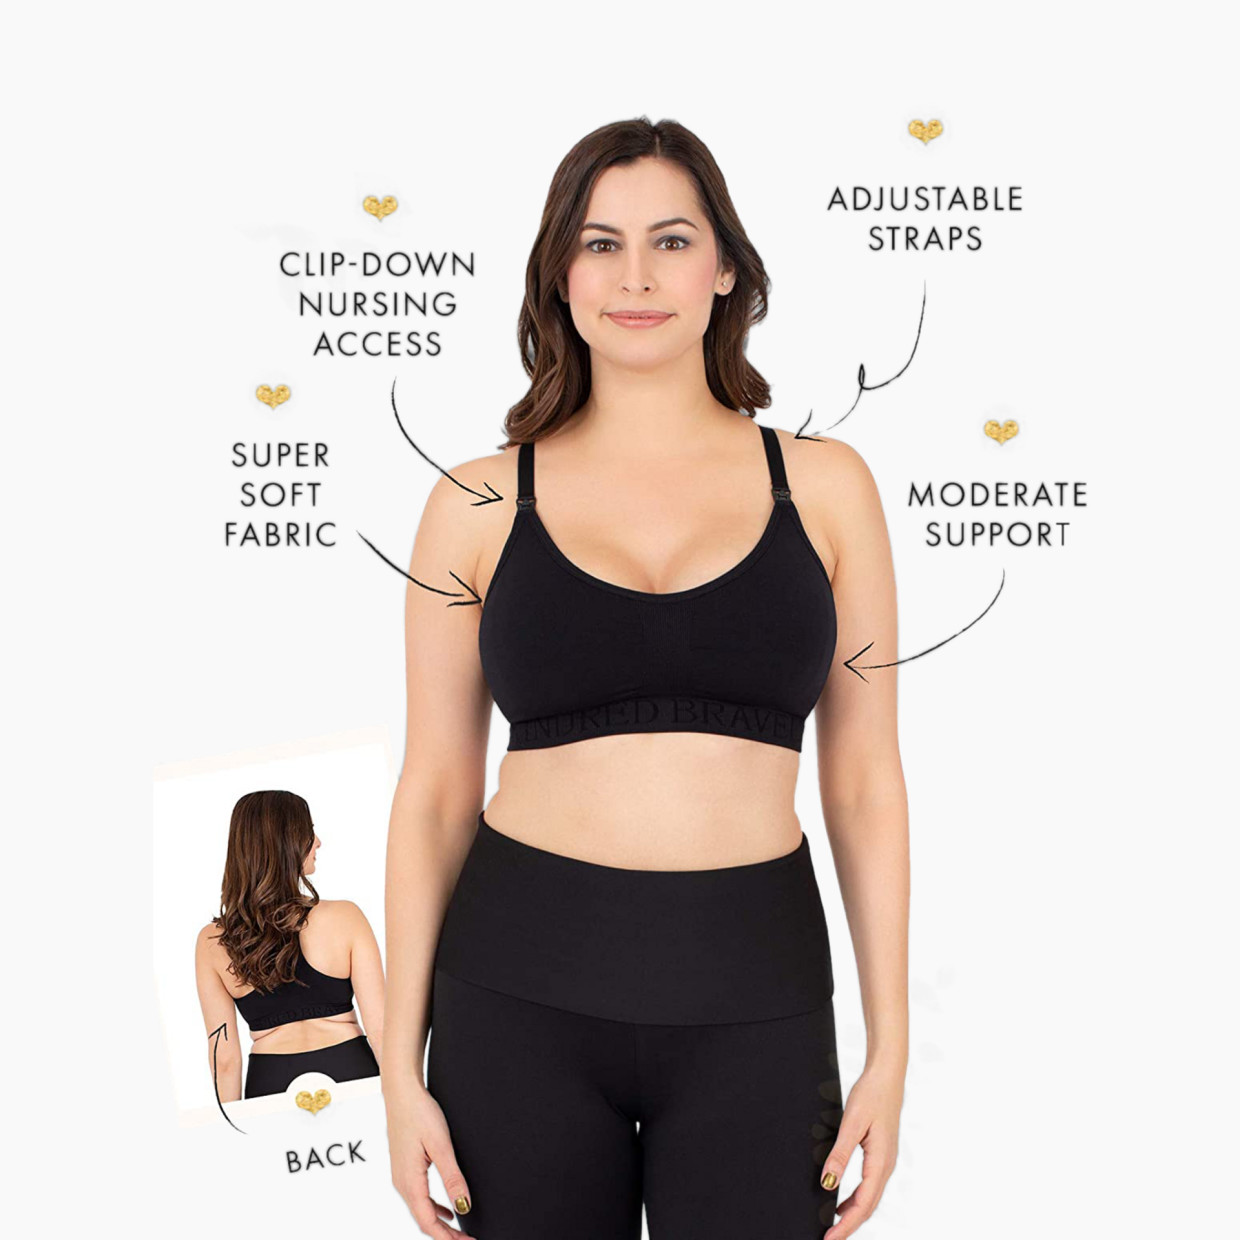 Kindred Bravely Sublime Support Low Impact Nursing & Maternity Sports Bra - Black, Xxx-Large-Busty.